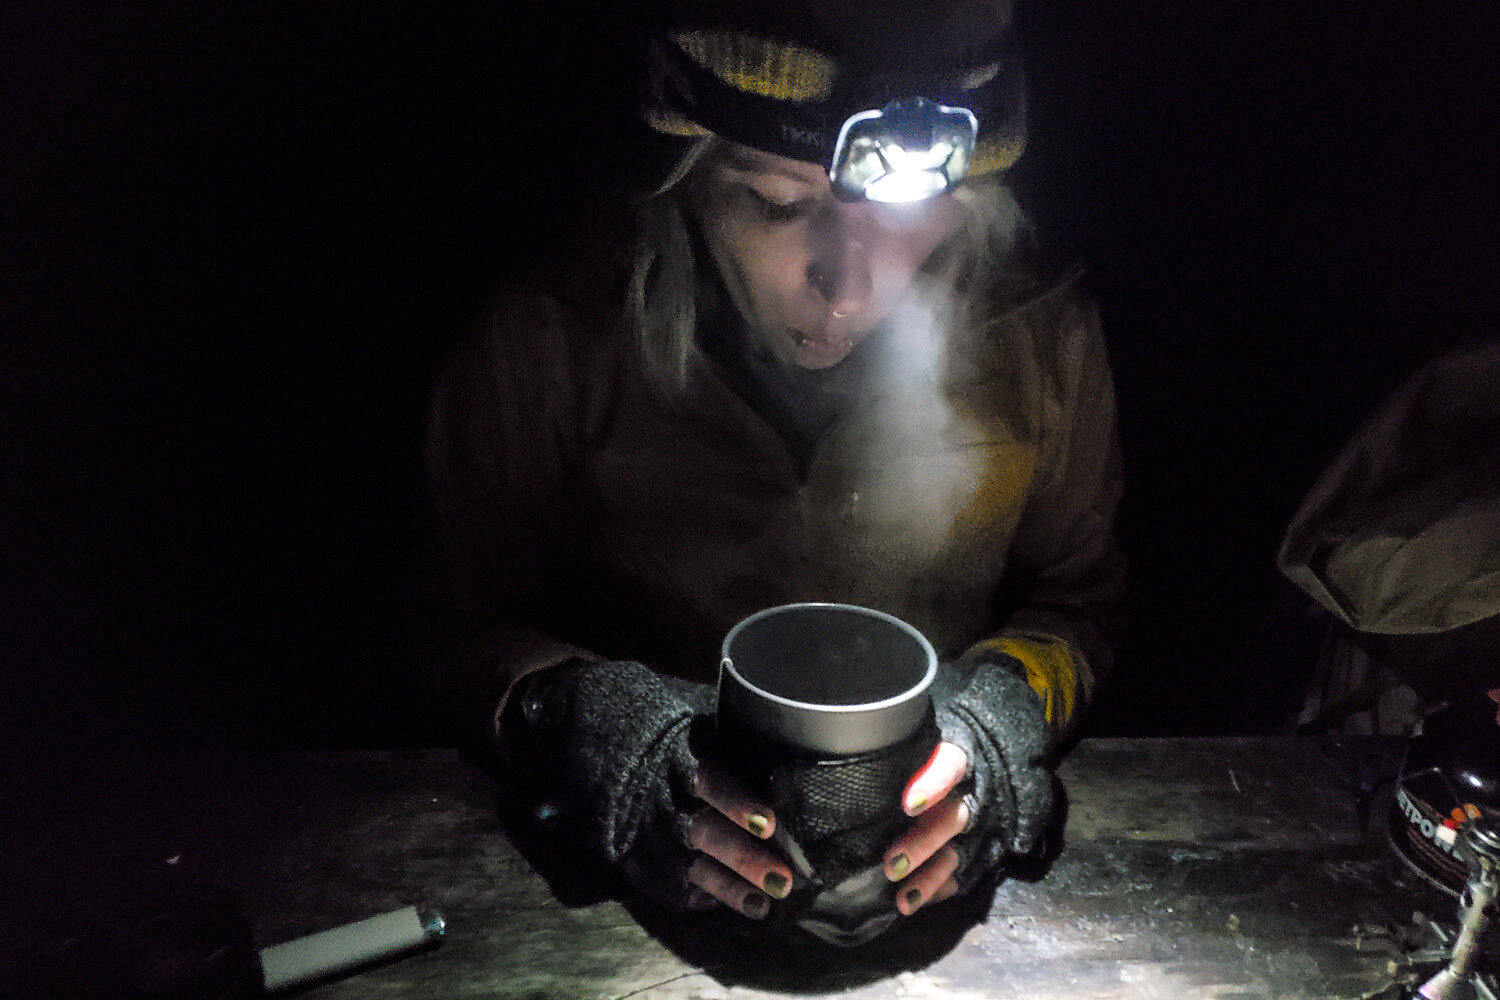 The Petzl Tikkina is our favorite budget headlamp. It puts out plenty of light for tasks around camp.